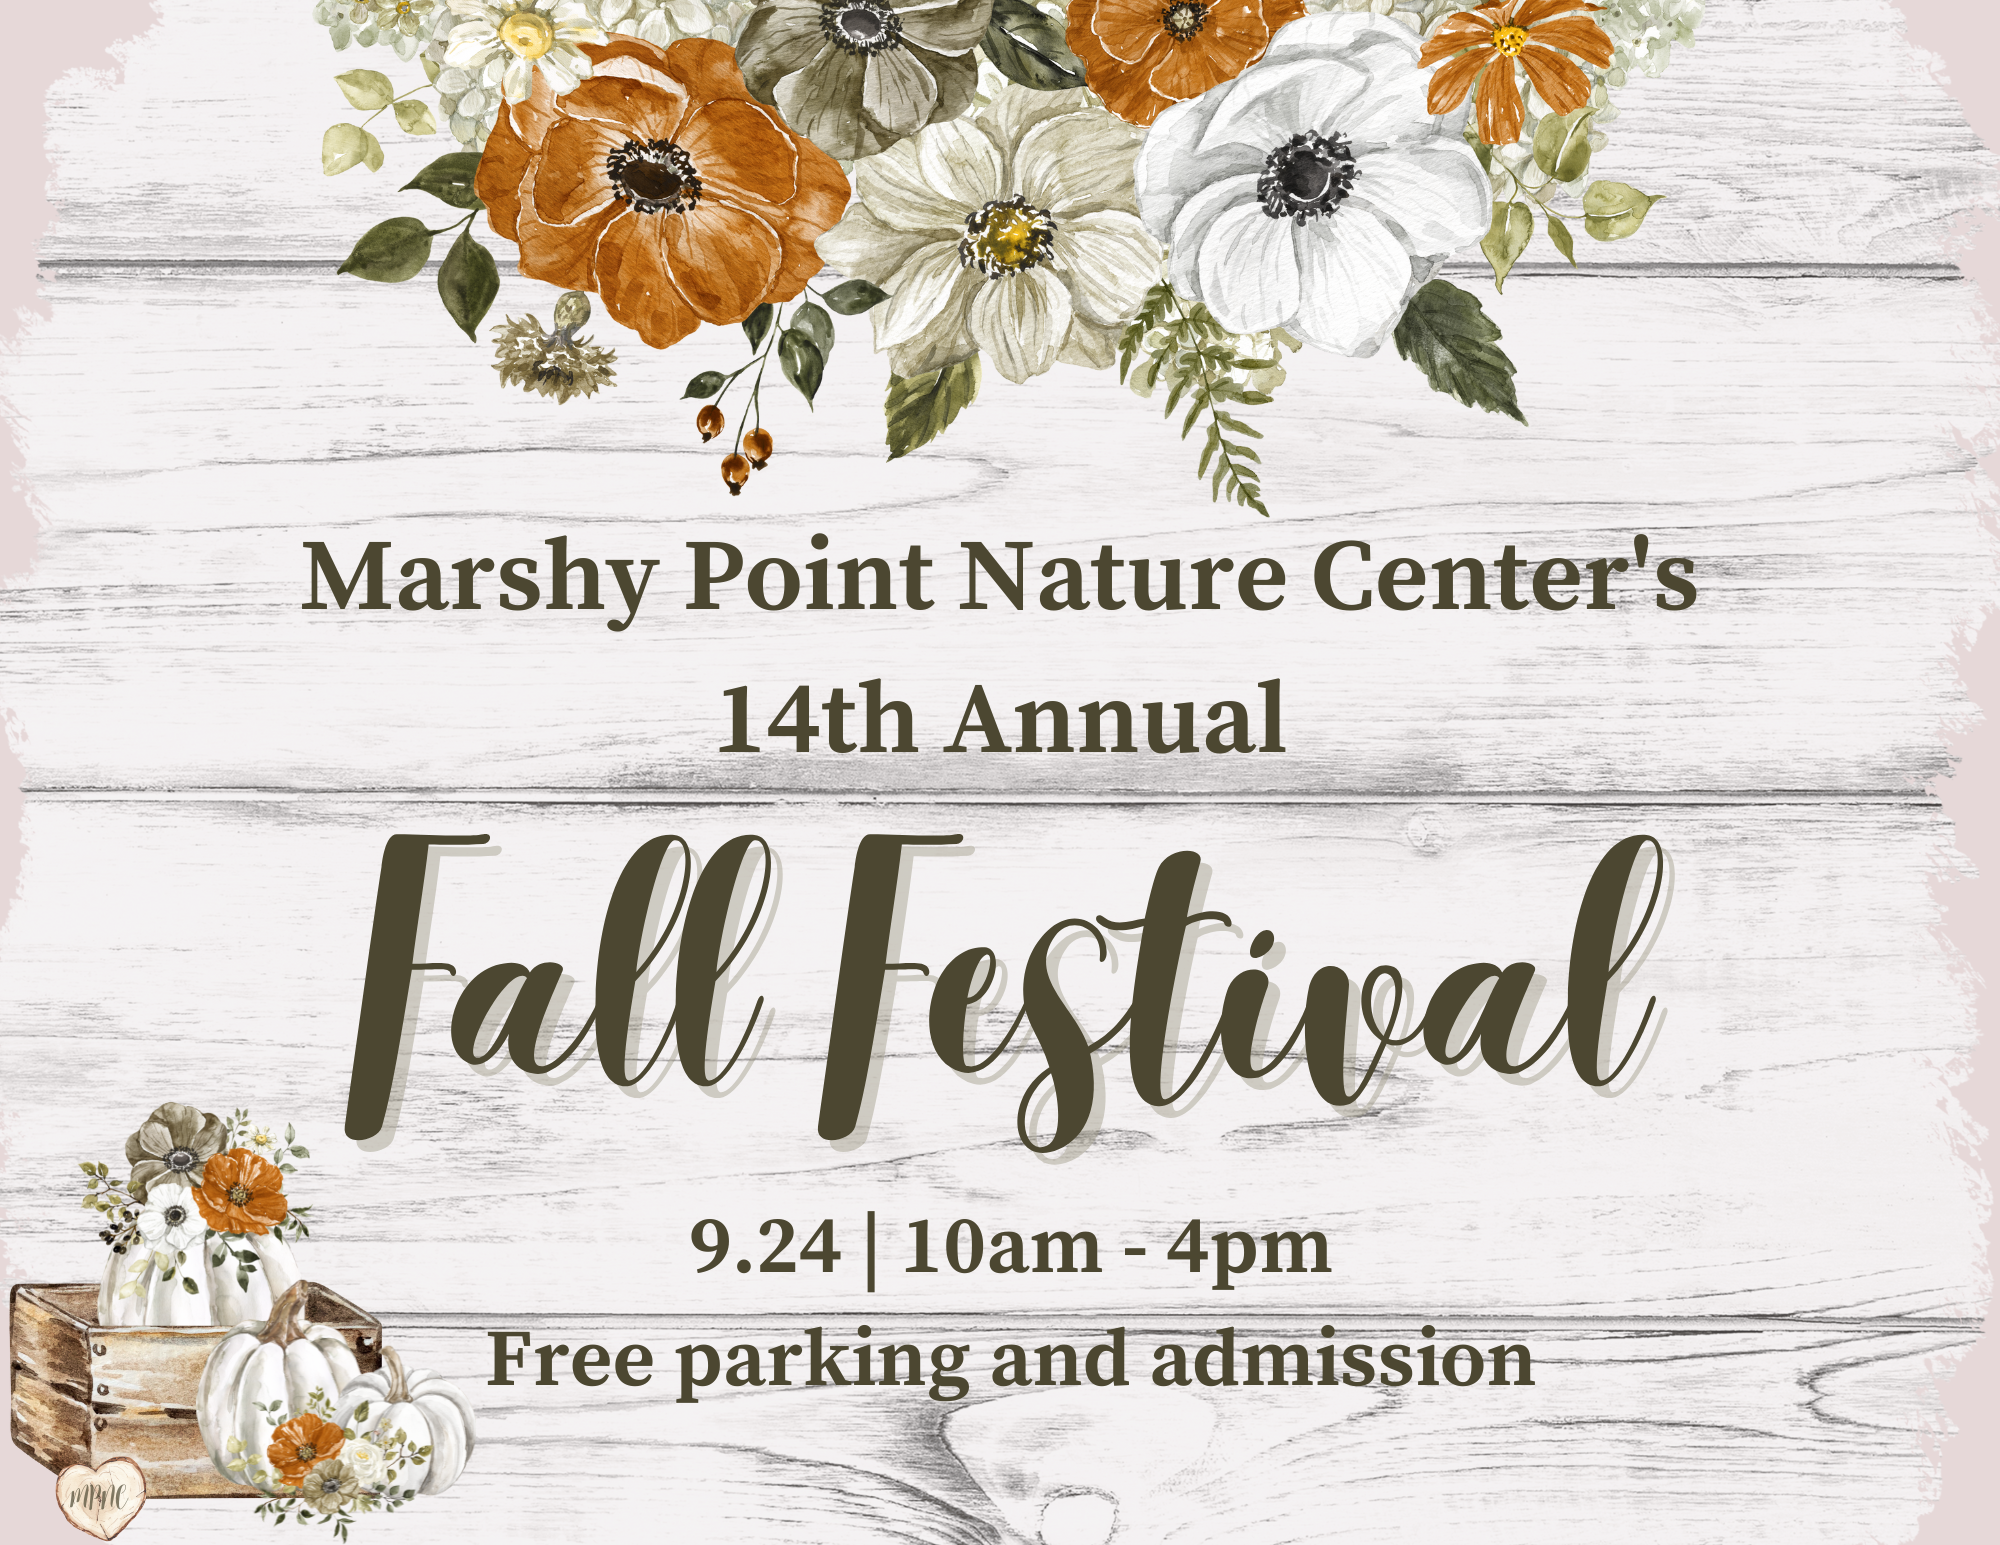 Annual fall festival at Marshy Point Nature Center on September 24, 2022 from 10am to 4pm. Free admission and parking.